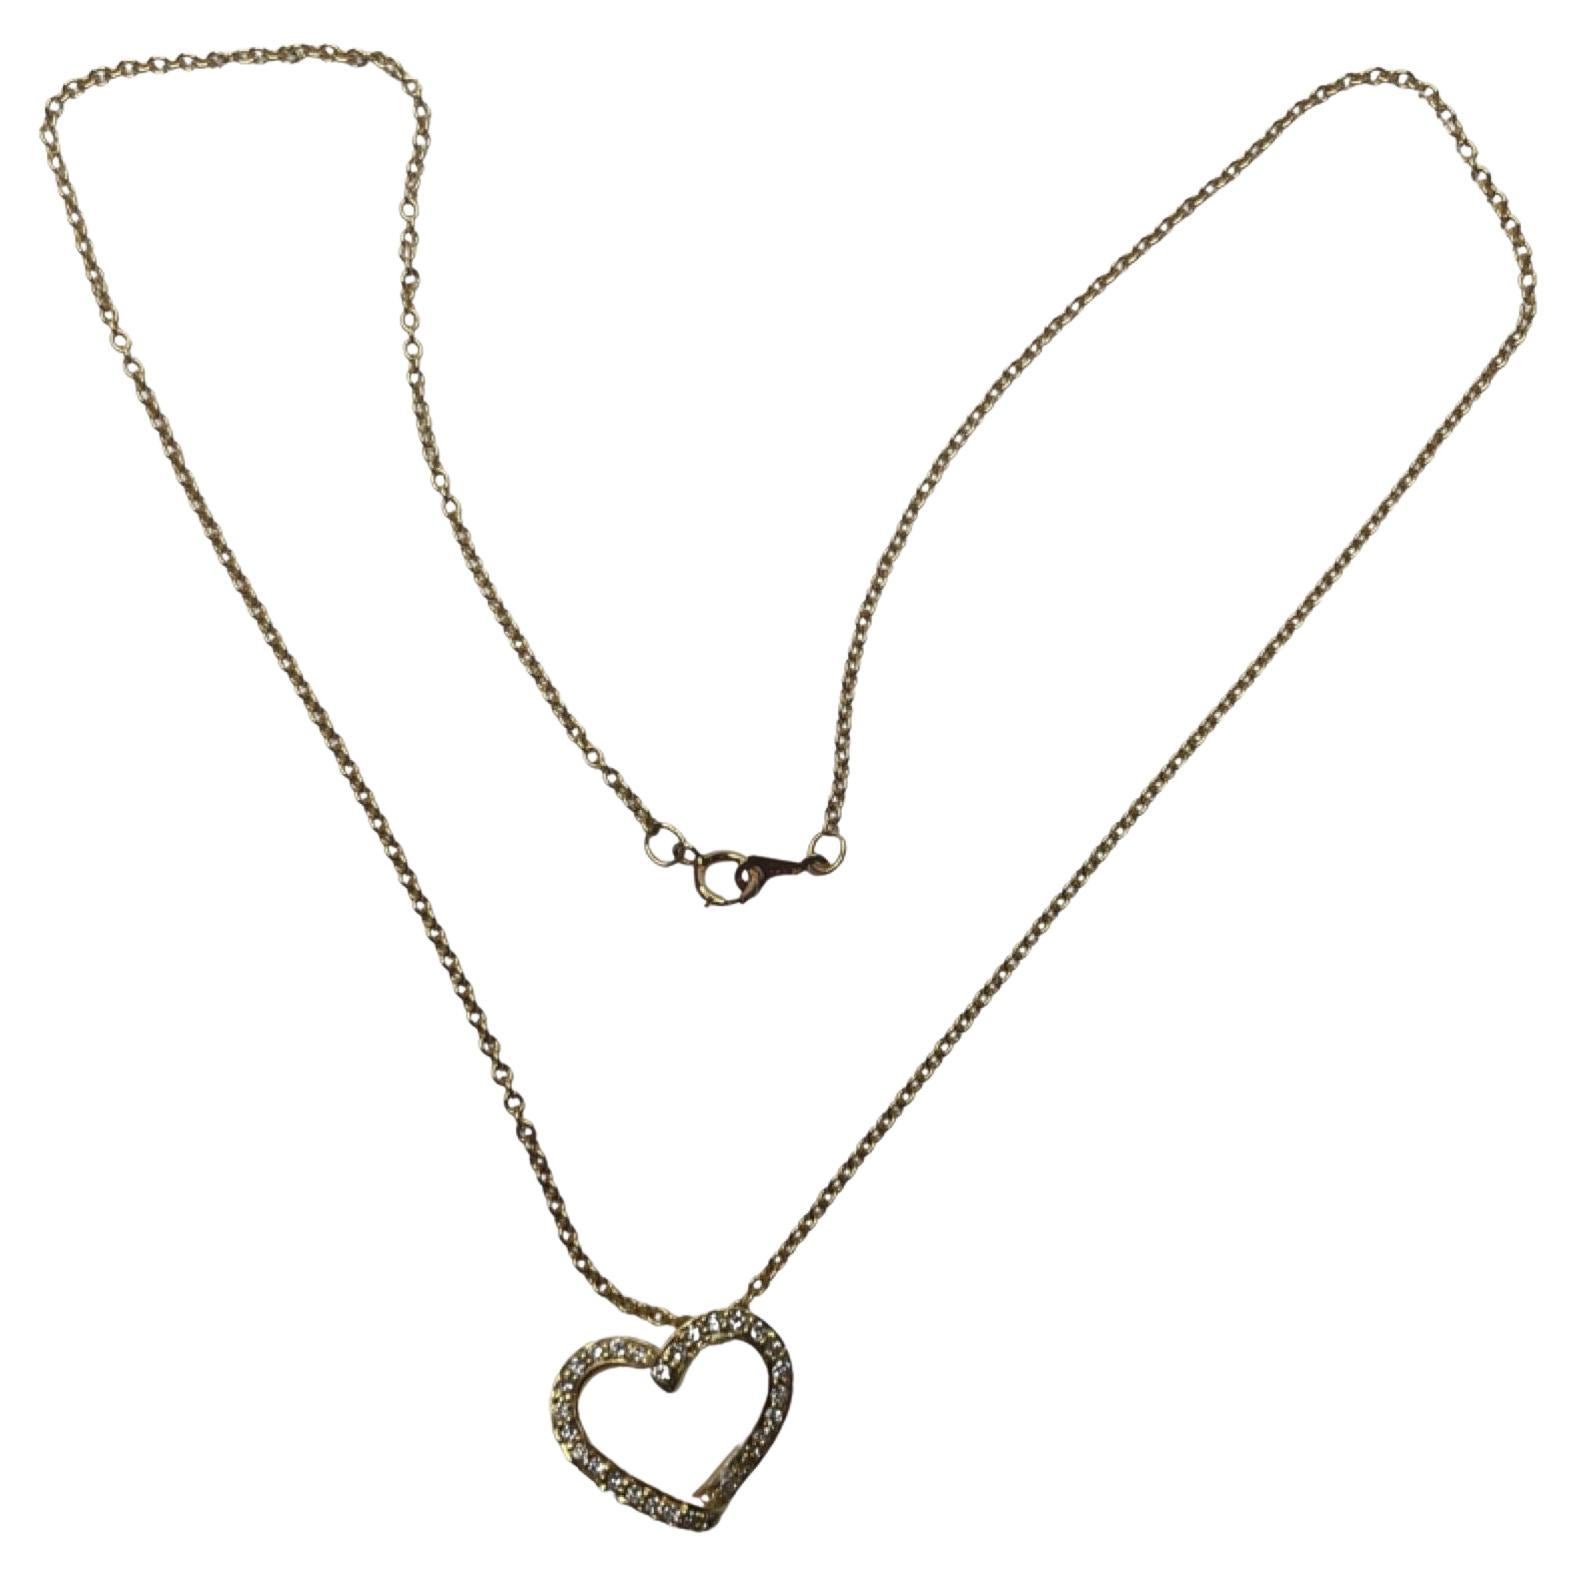 Honora 18K yellow Gold Diamond Heart Pendant with Chain.  There are 29, full cut round brilliant diamonds, for a total diamond weight of 0.22 carats. The diamonds are of VS clarity and G color. The heart is 17.0 mm x 15.0 mm. There is a hidden bail